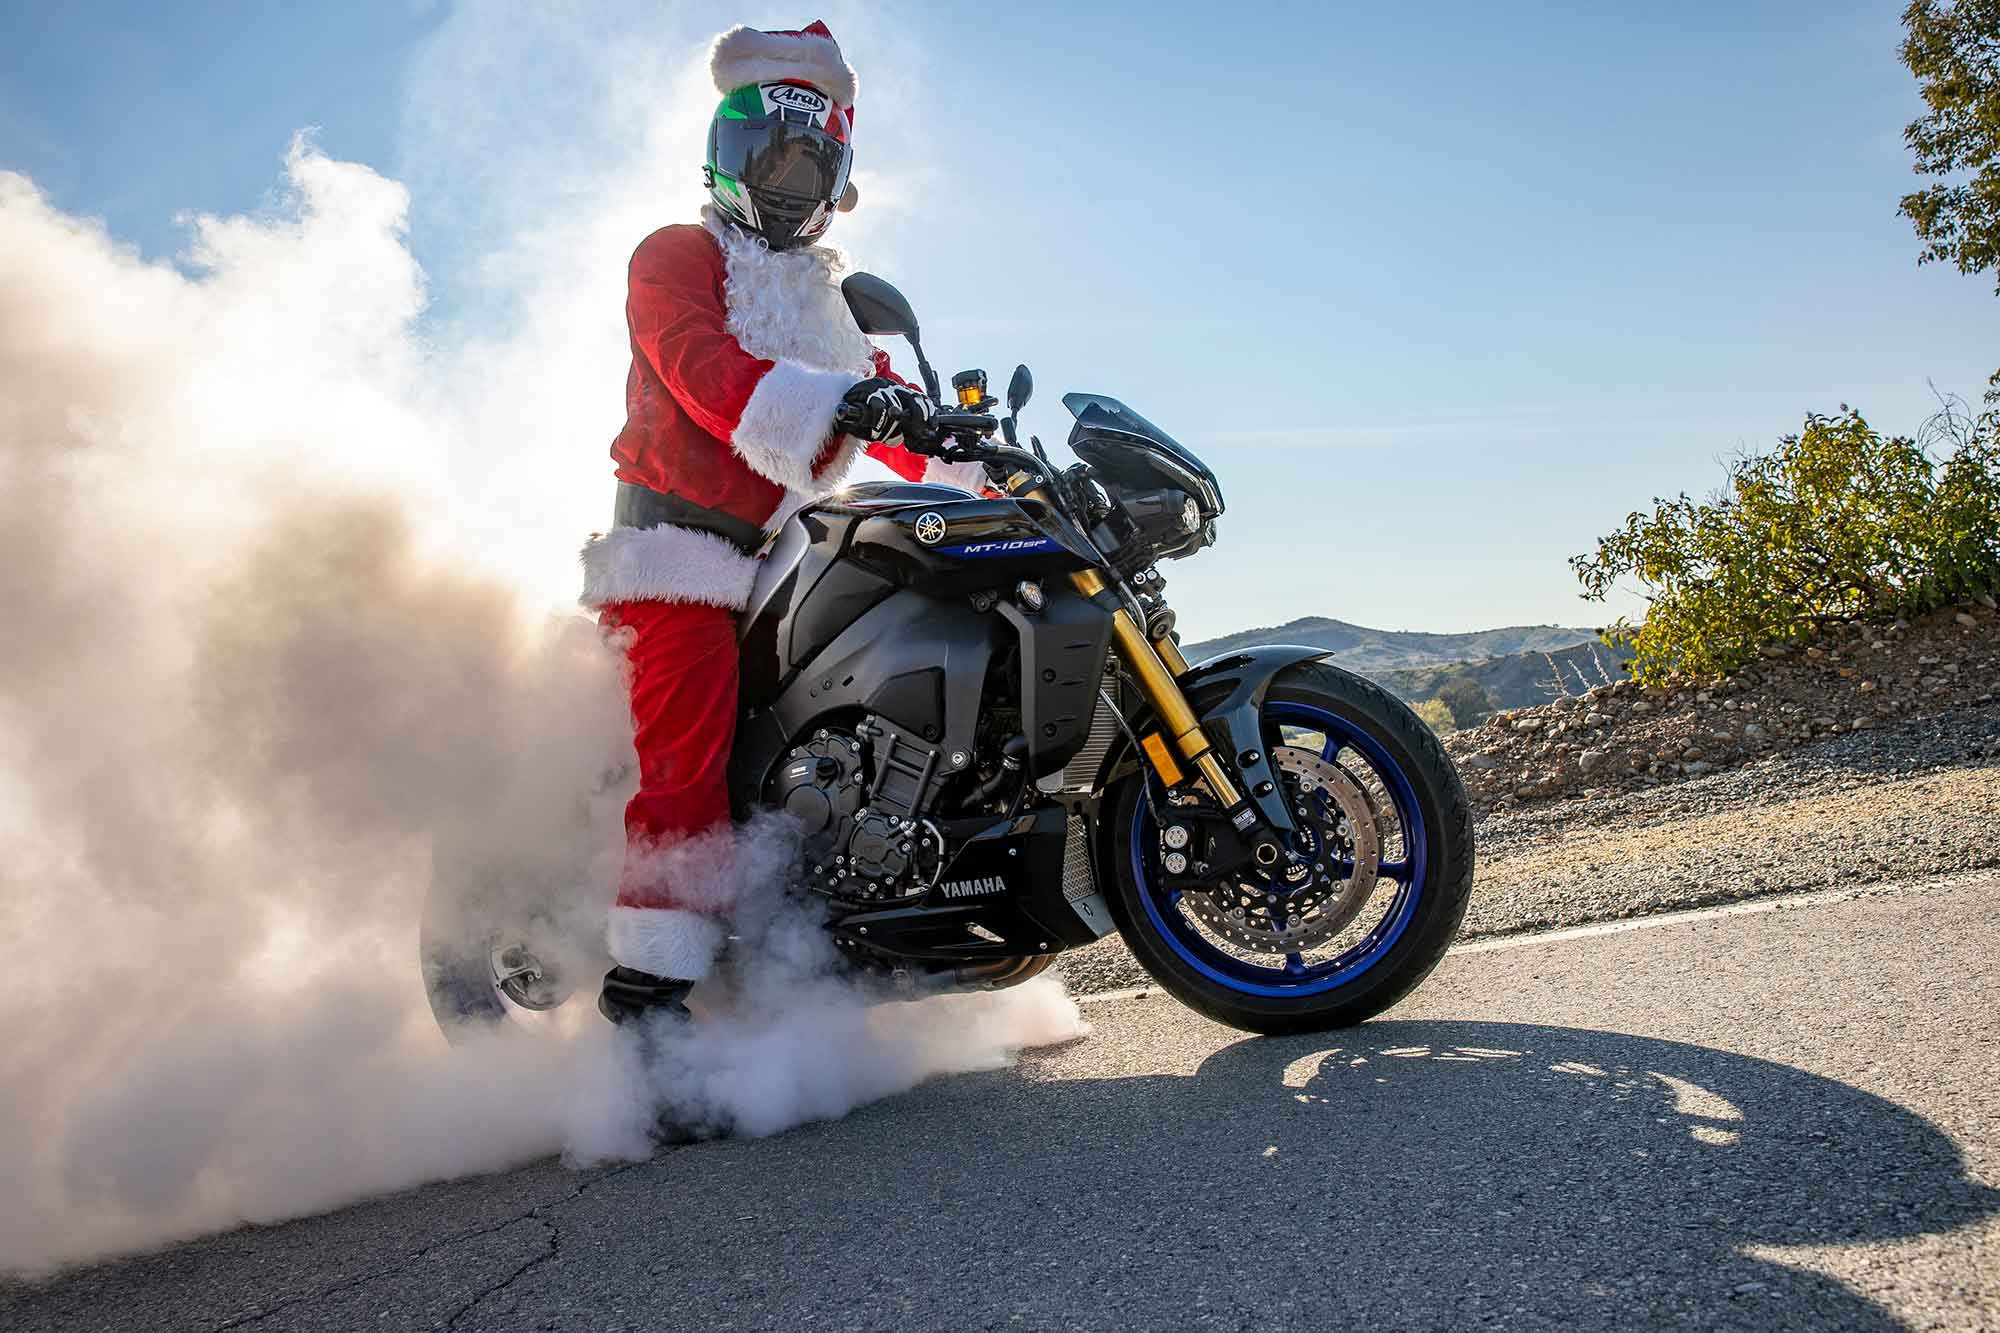 After a hard day’s work, Santa Claus celebrates with a big smelly burnout.